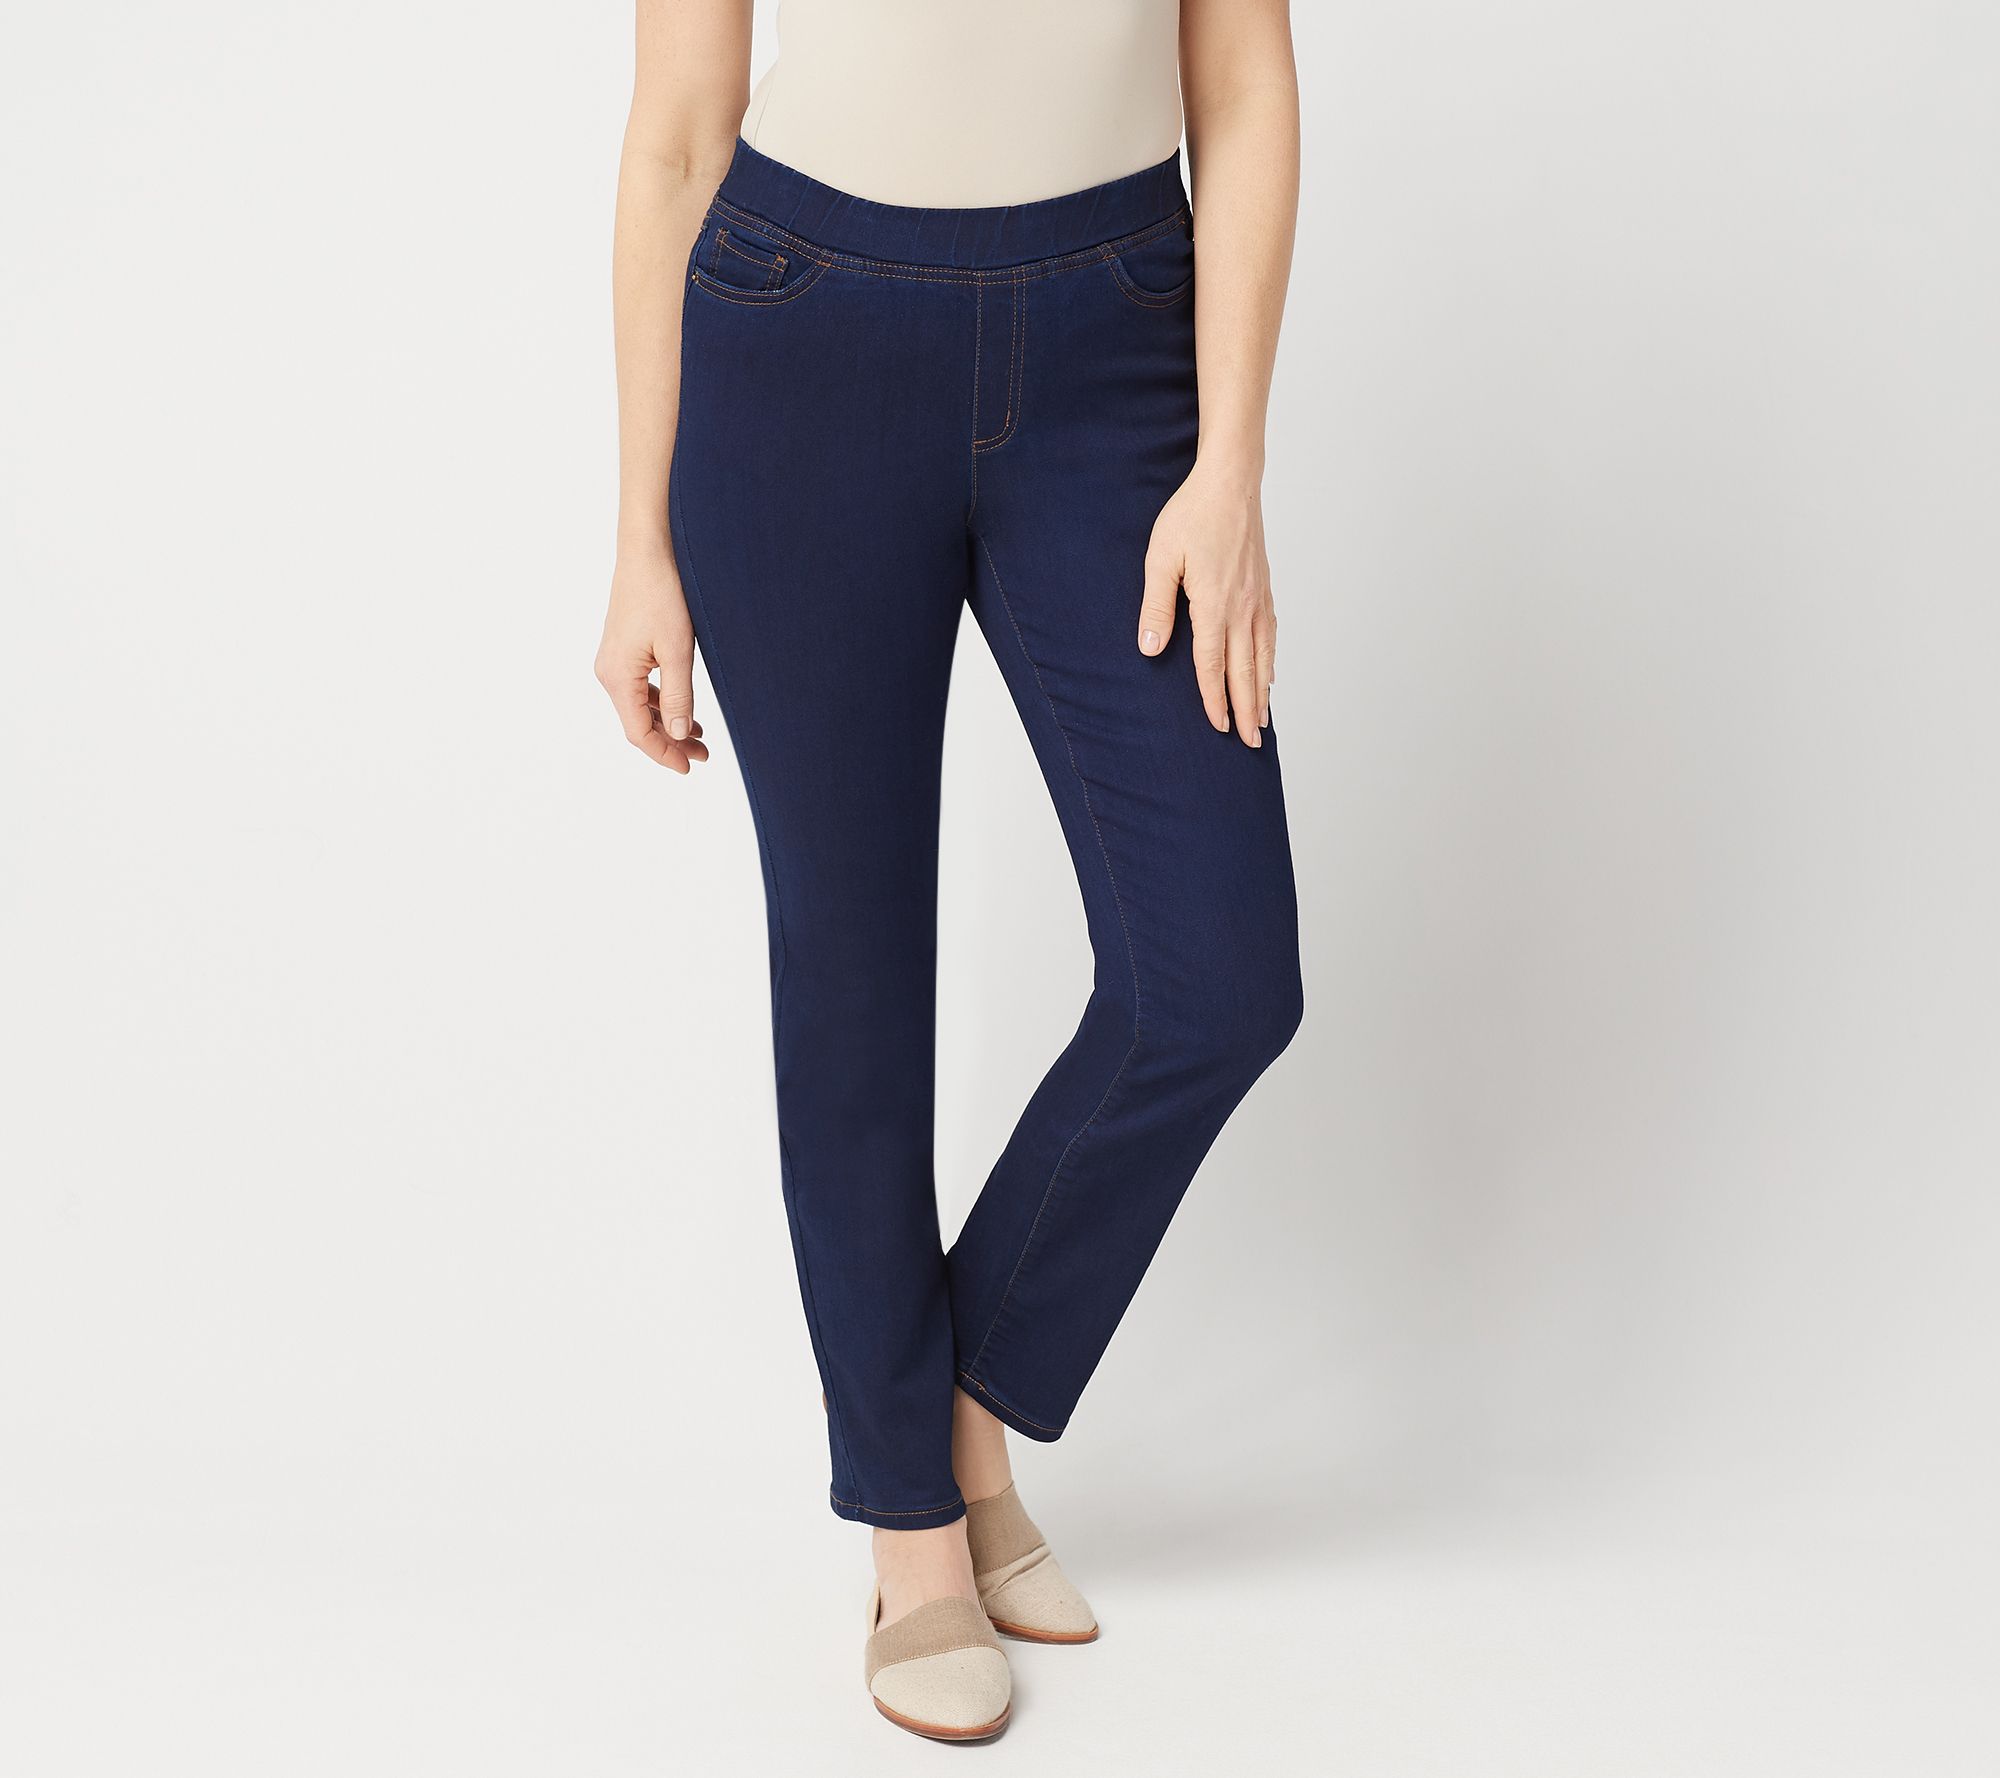 denim and company stretch jeans